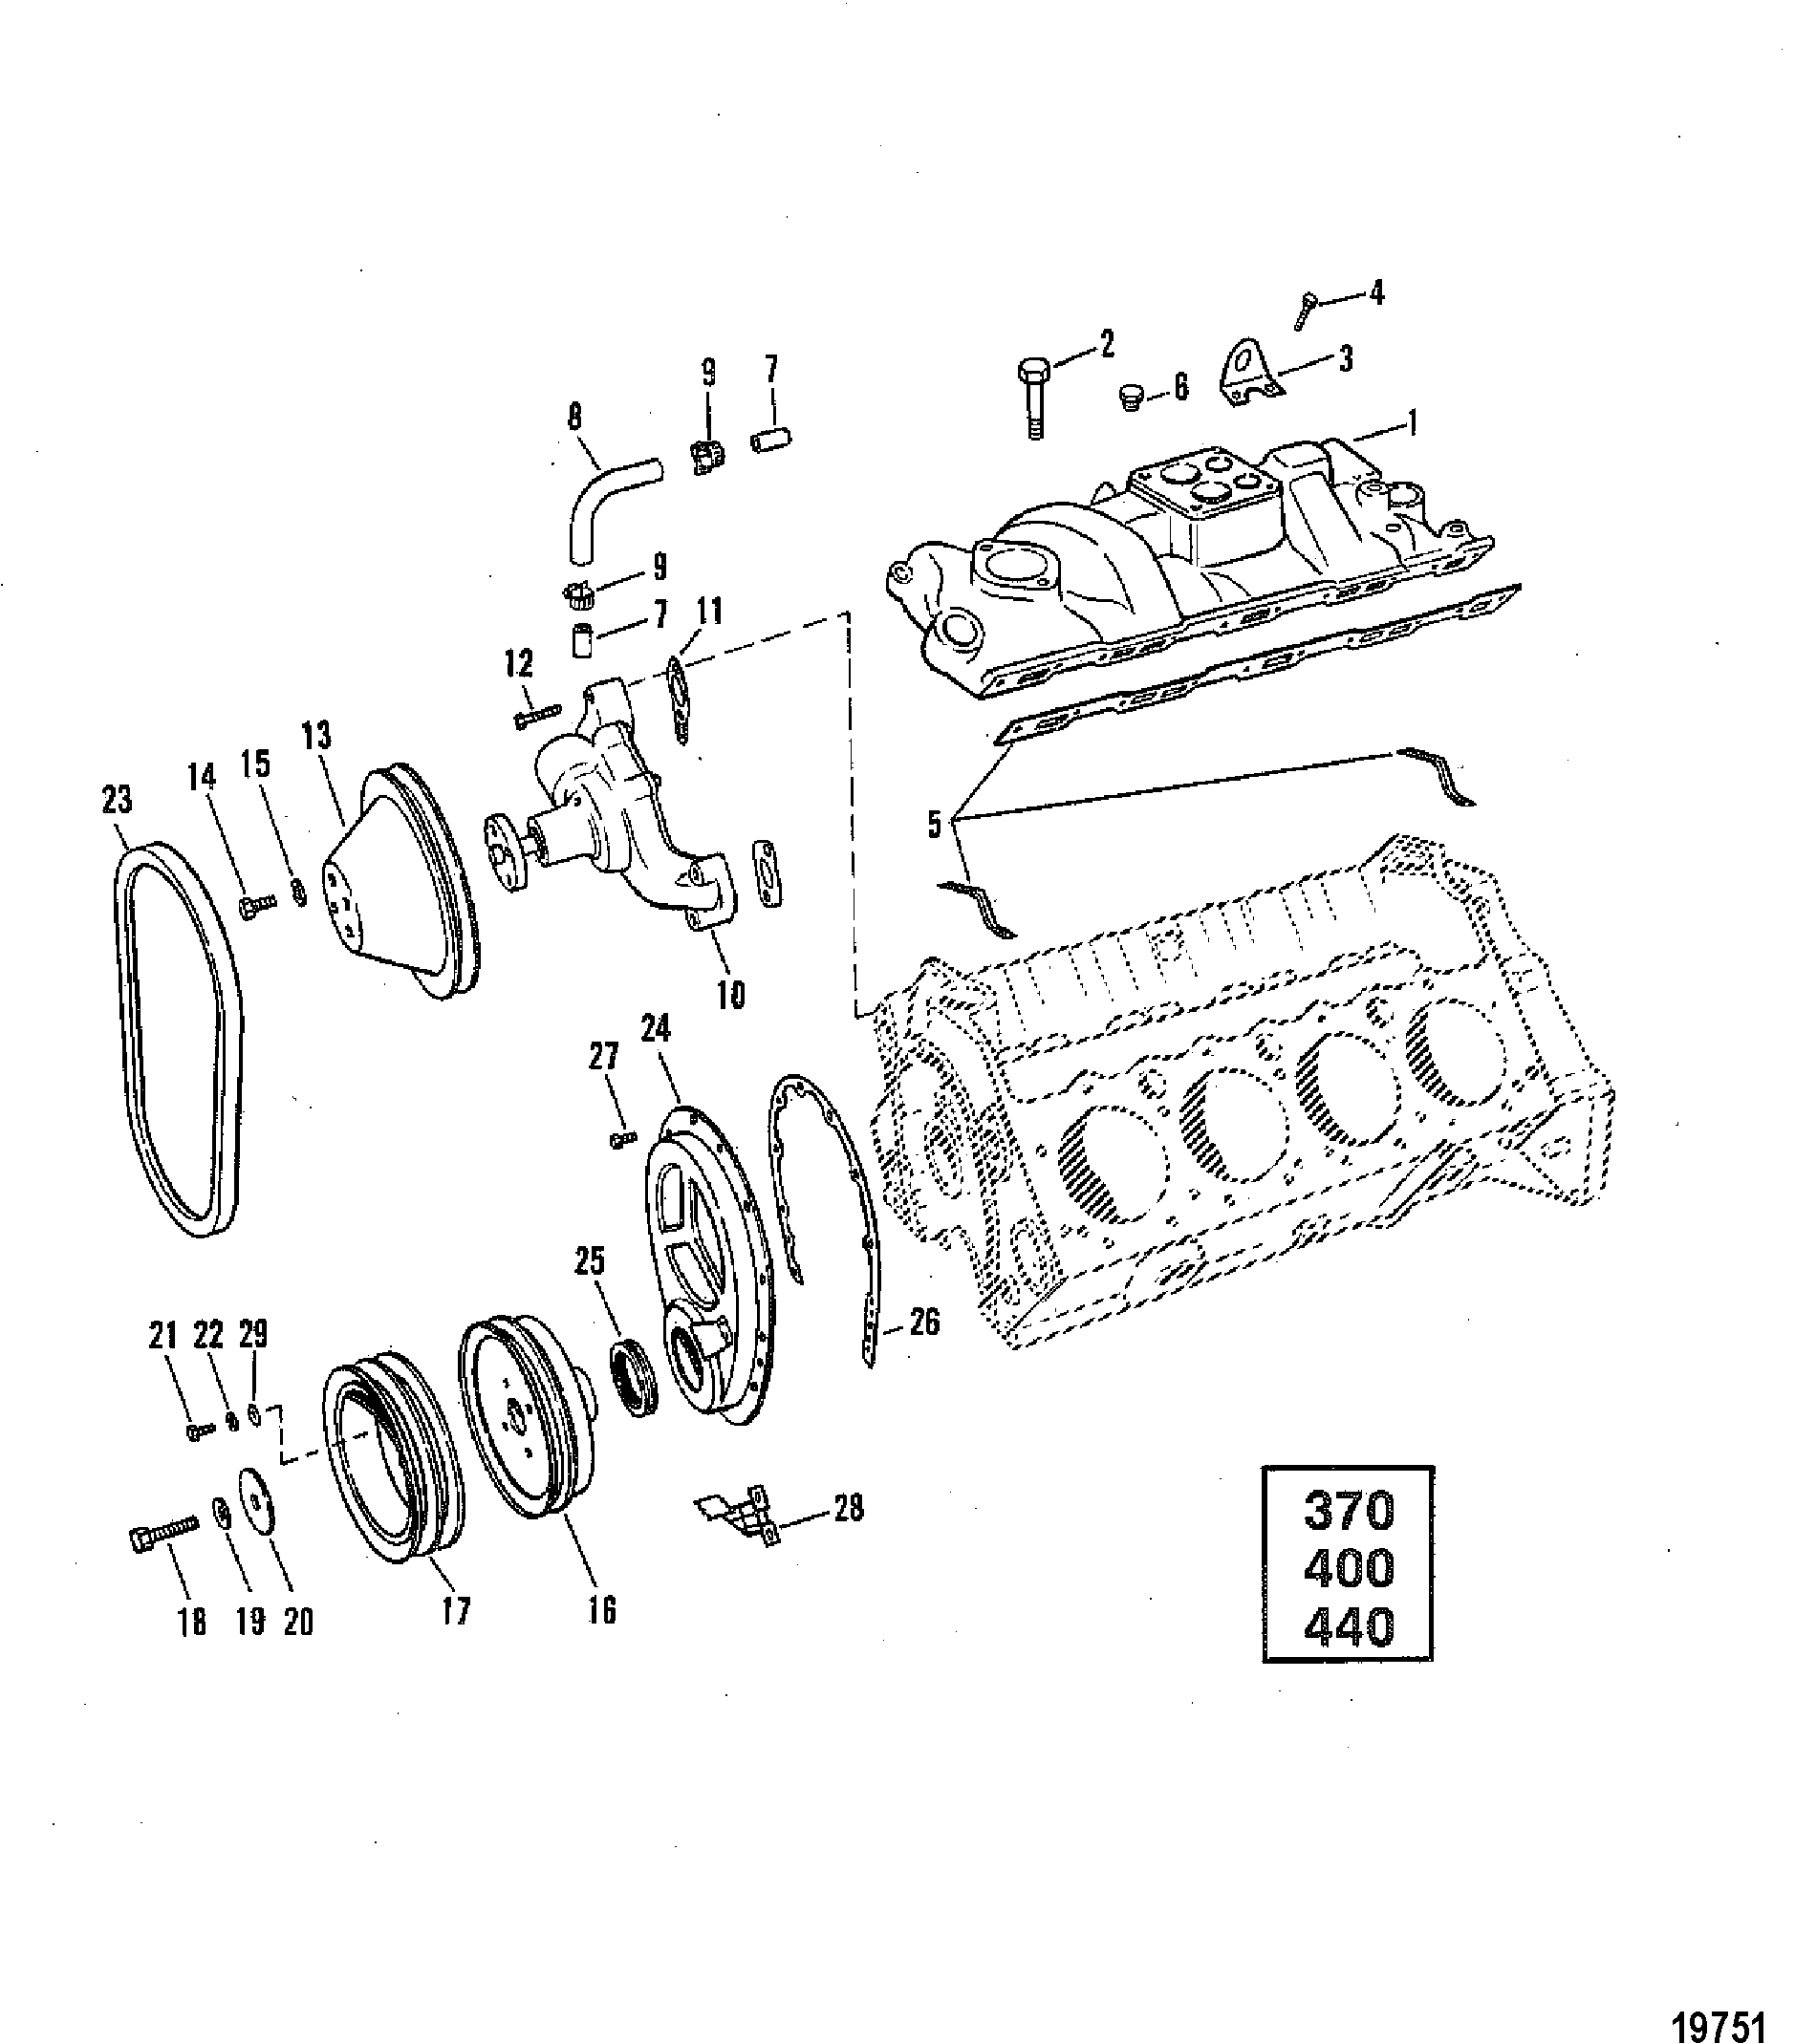 Intake Manifold and Front Cover(370/400/440)